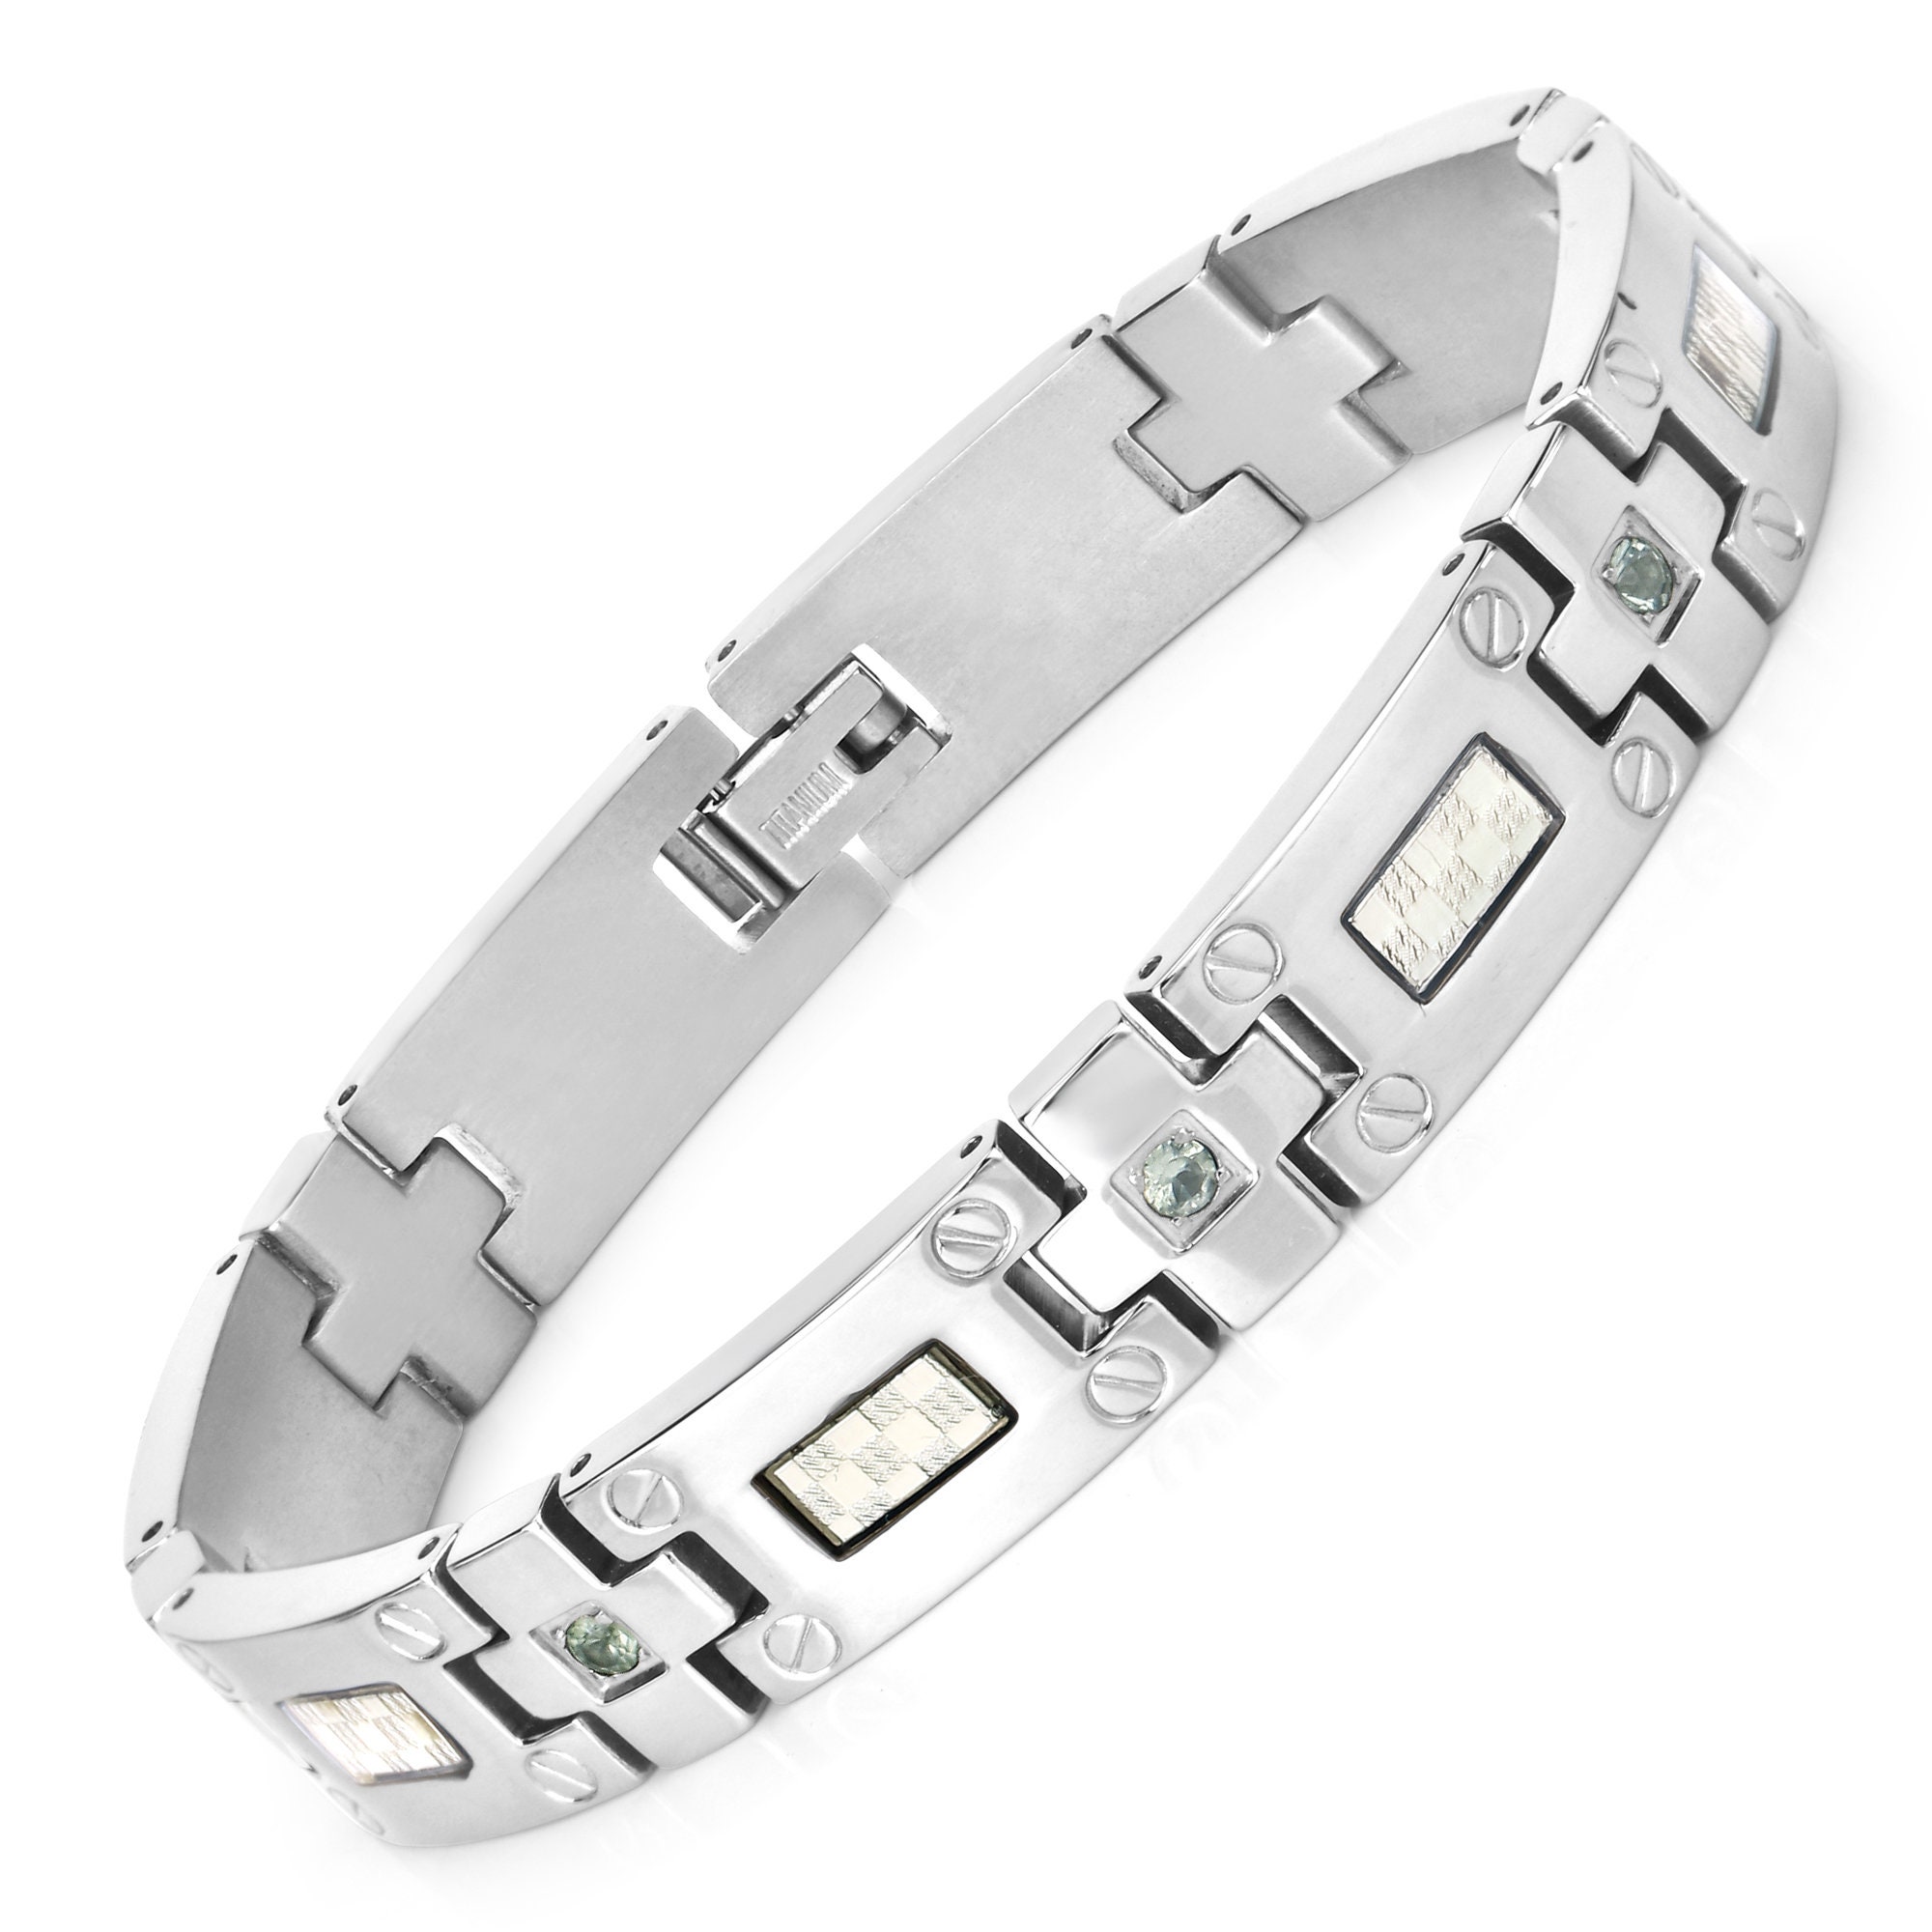 Titanium Bracelet - Get Best Price from Manufacturers & Suppliers in India